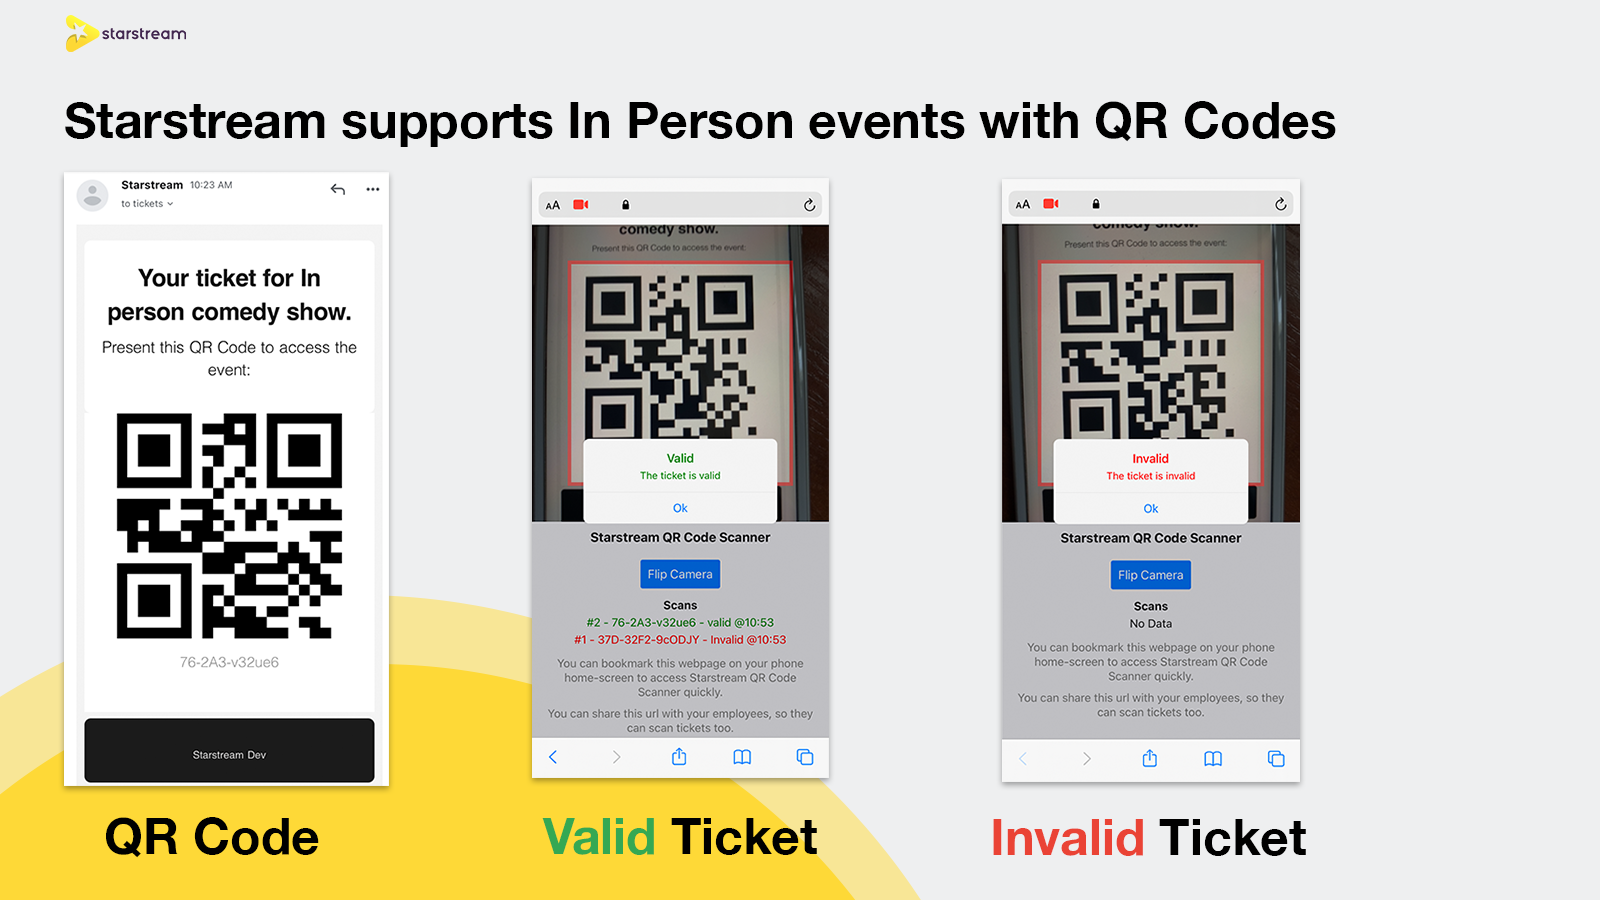 Starstream supports In Person events with QR Codes